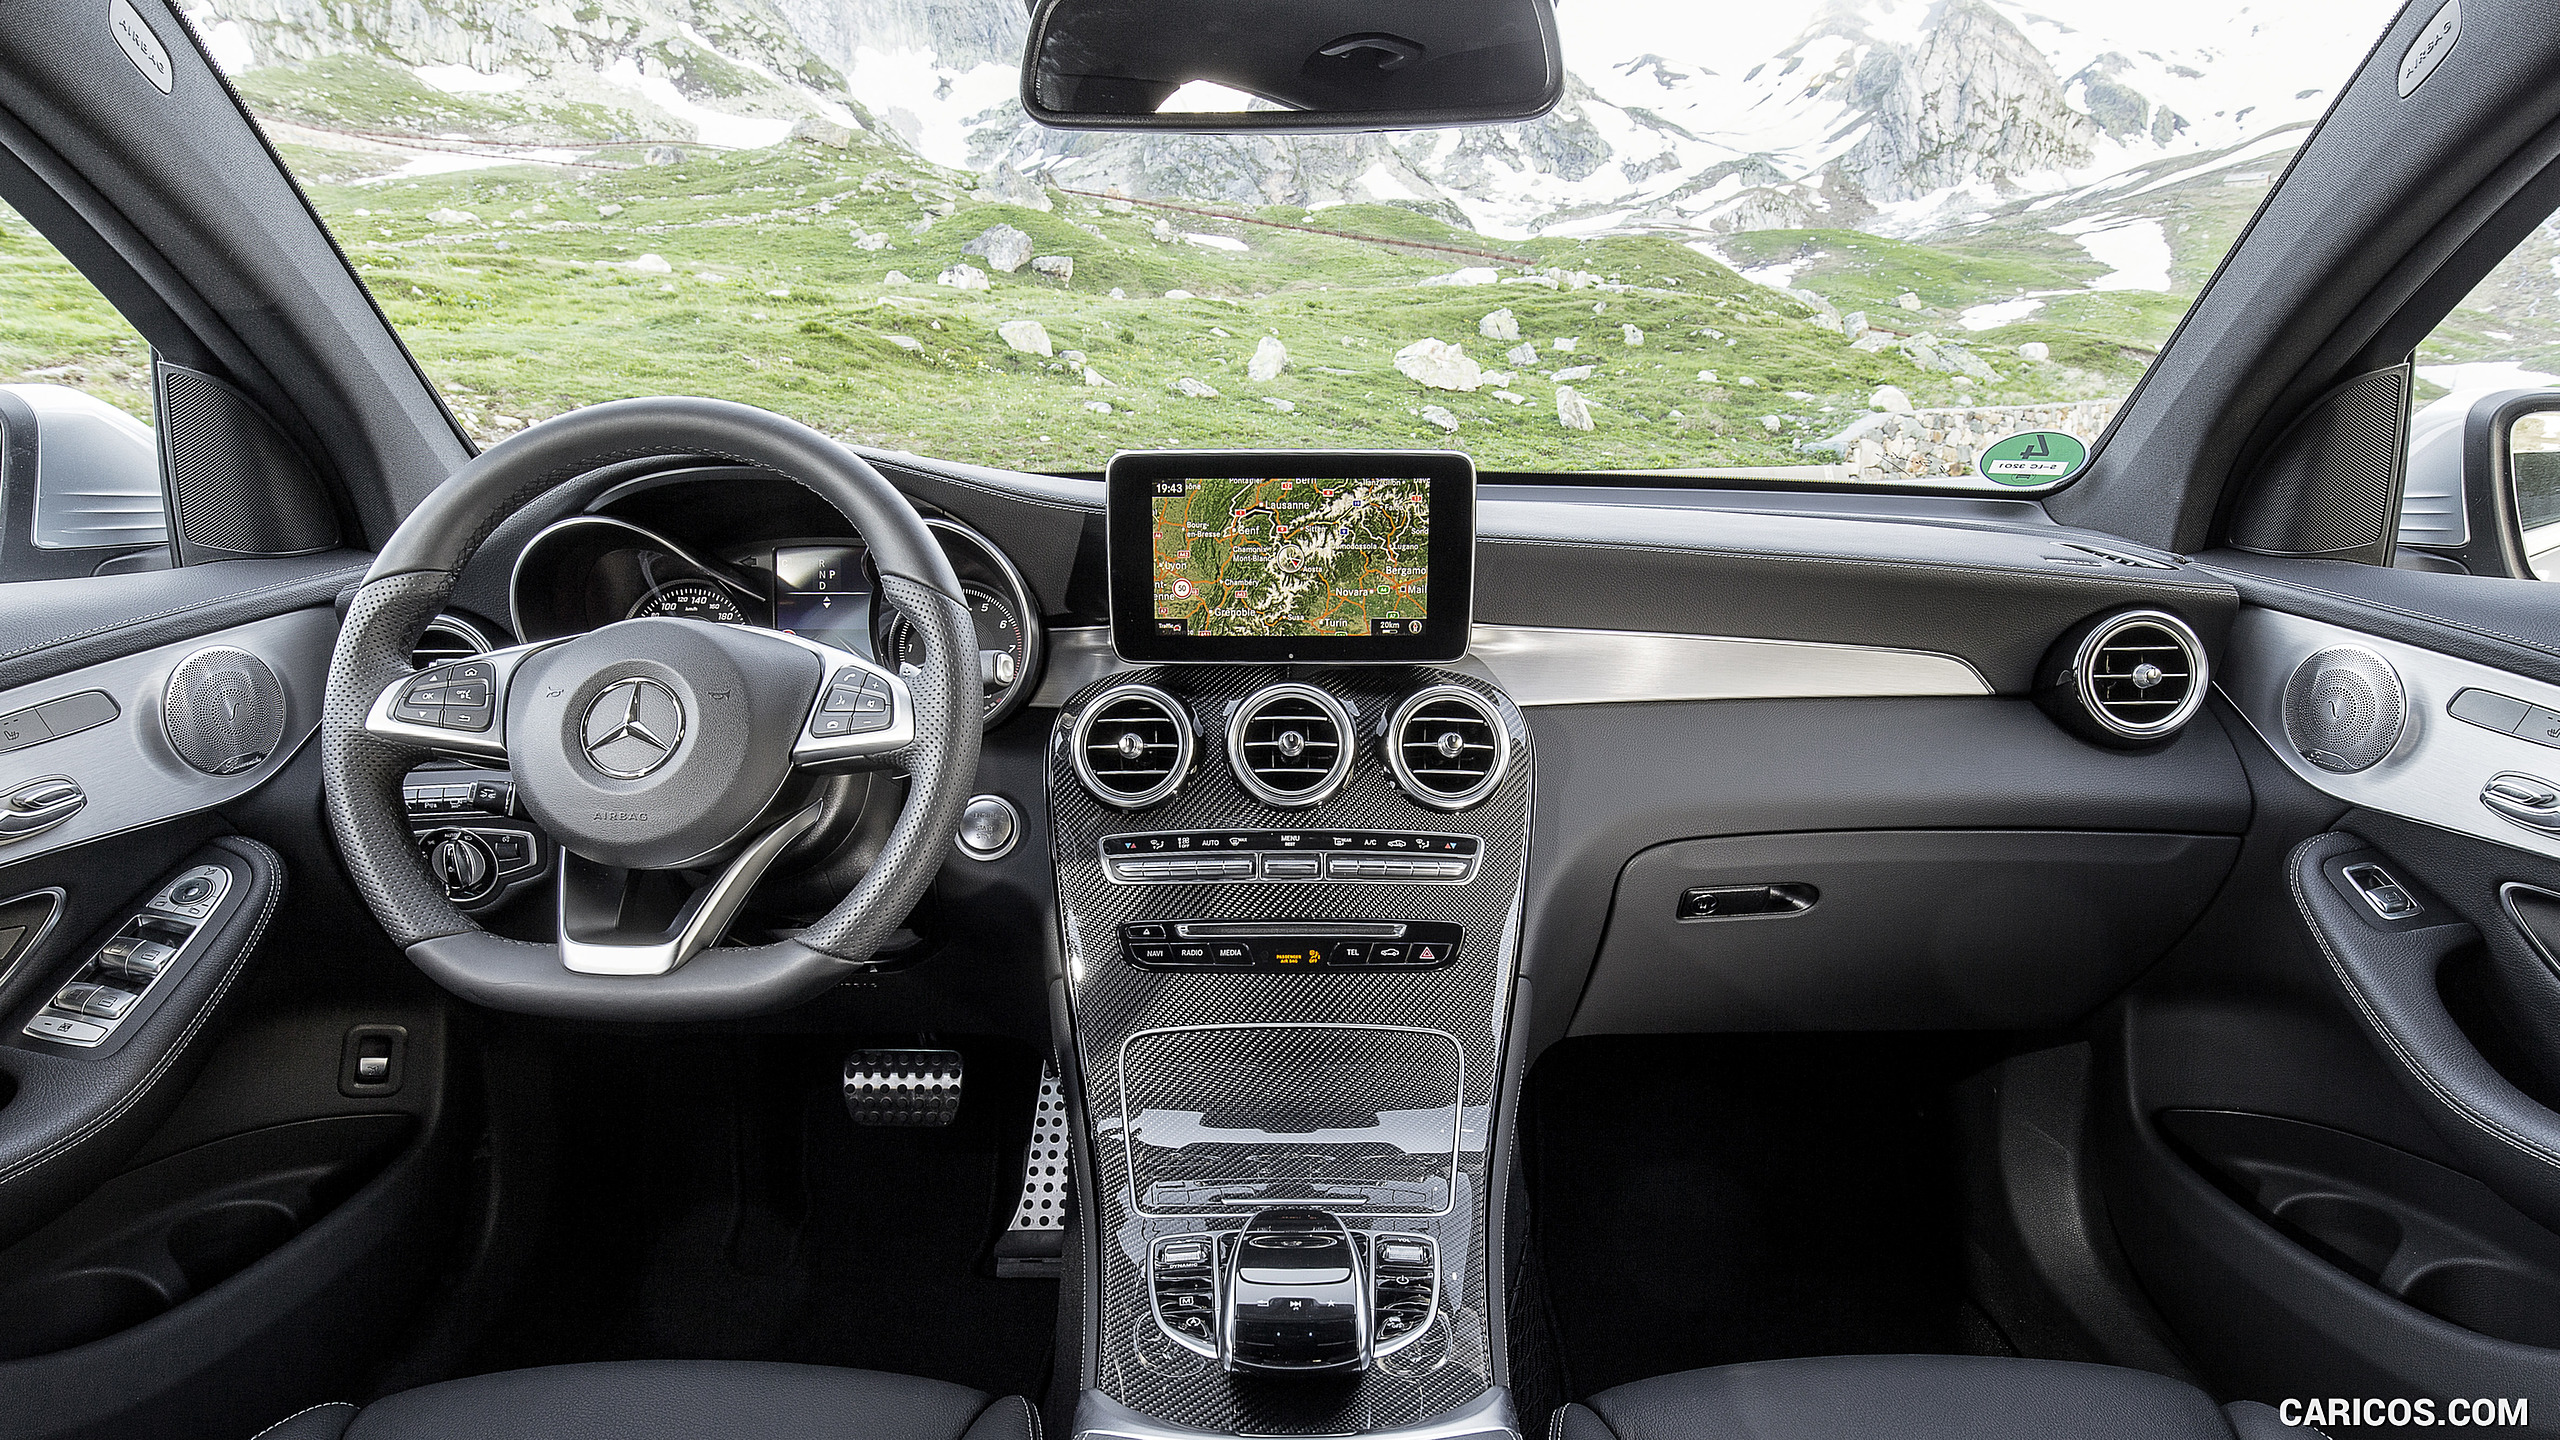 2017 Mercedes-Benz GLC 300 Coupe - Cranberry Red / Black Leather Interior, Cockpit, #97 of 144